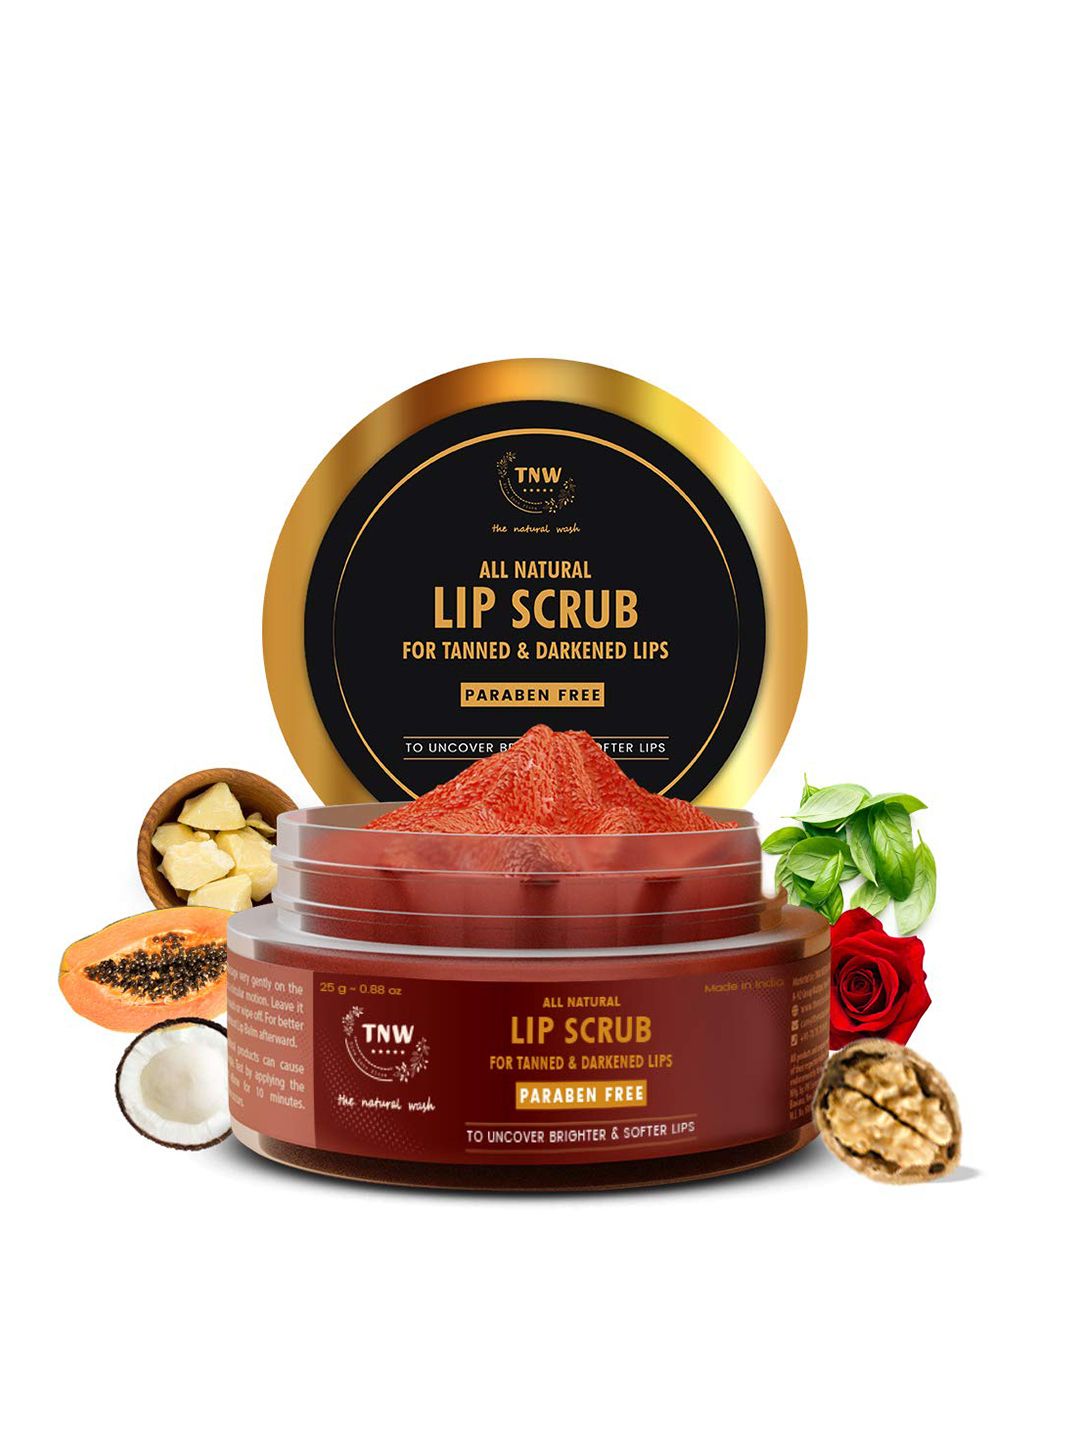 TNW the natural wash Lip Scrub for Tanned & Darkened Lips with Brown Sugar - 25 g Price in India